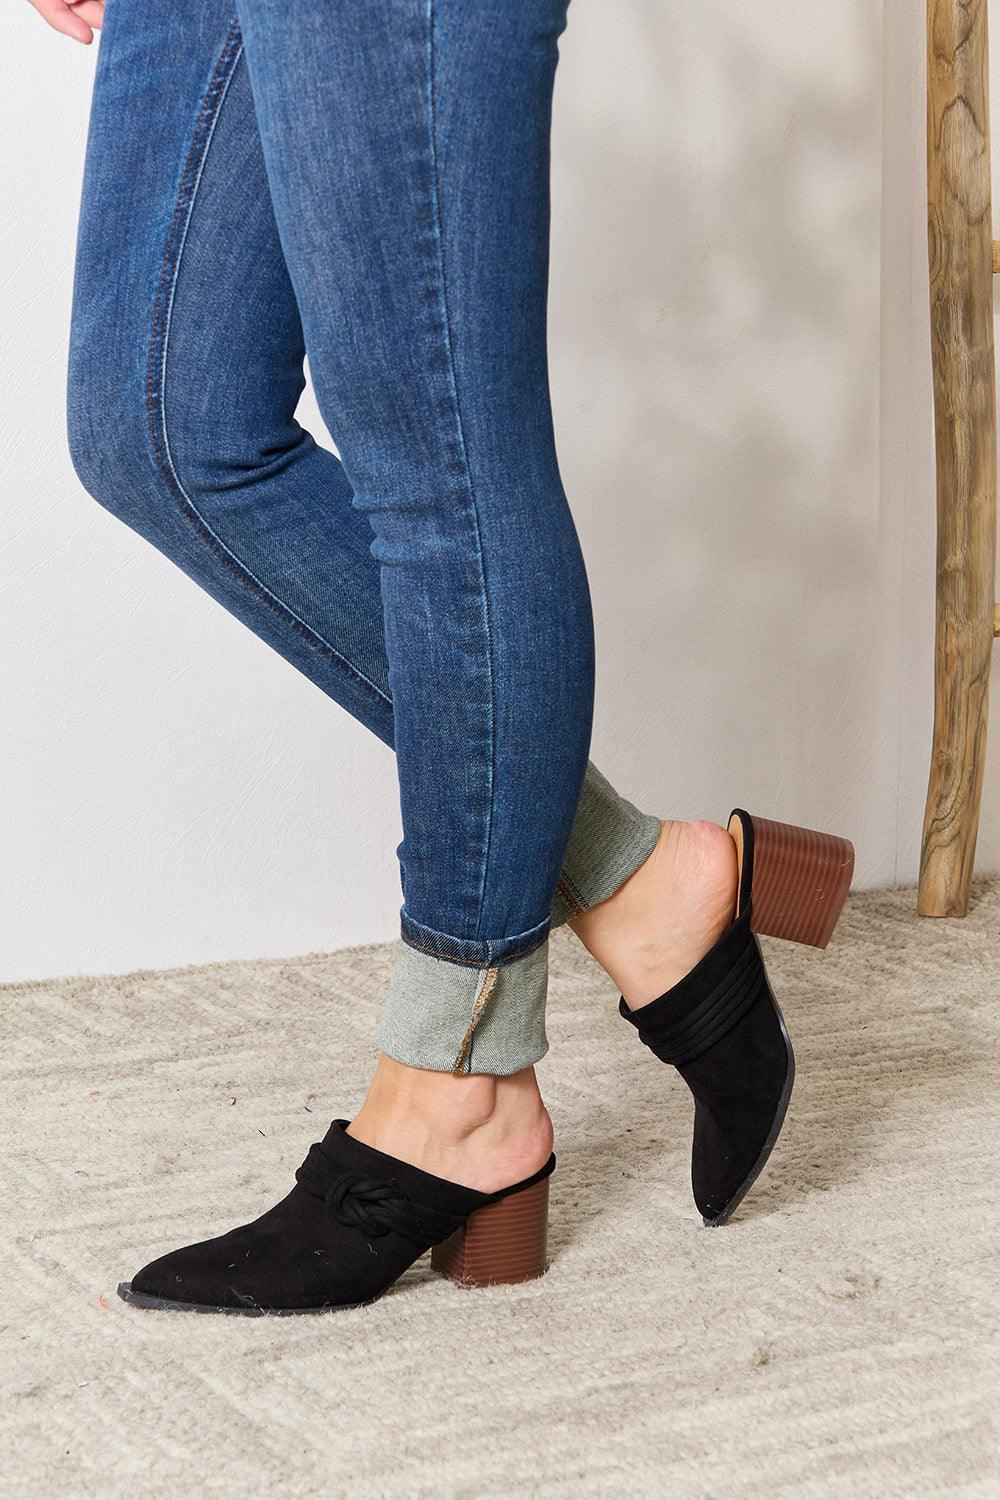 Black Pointed Toe Mules - Inspired Eye Boutique